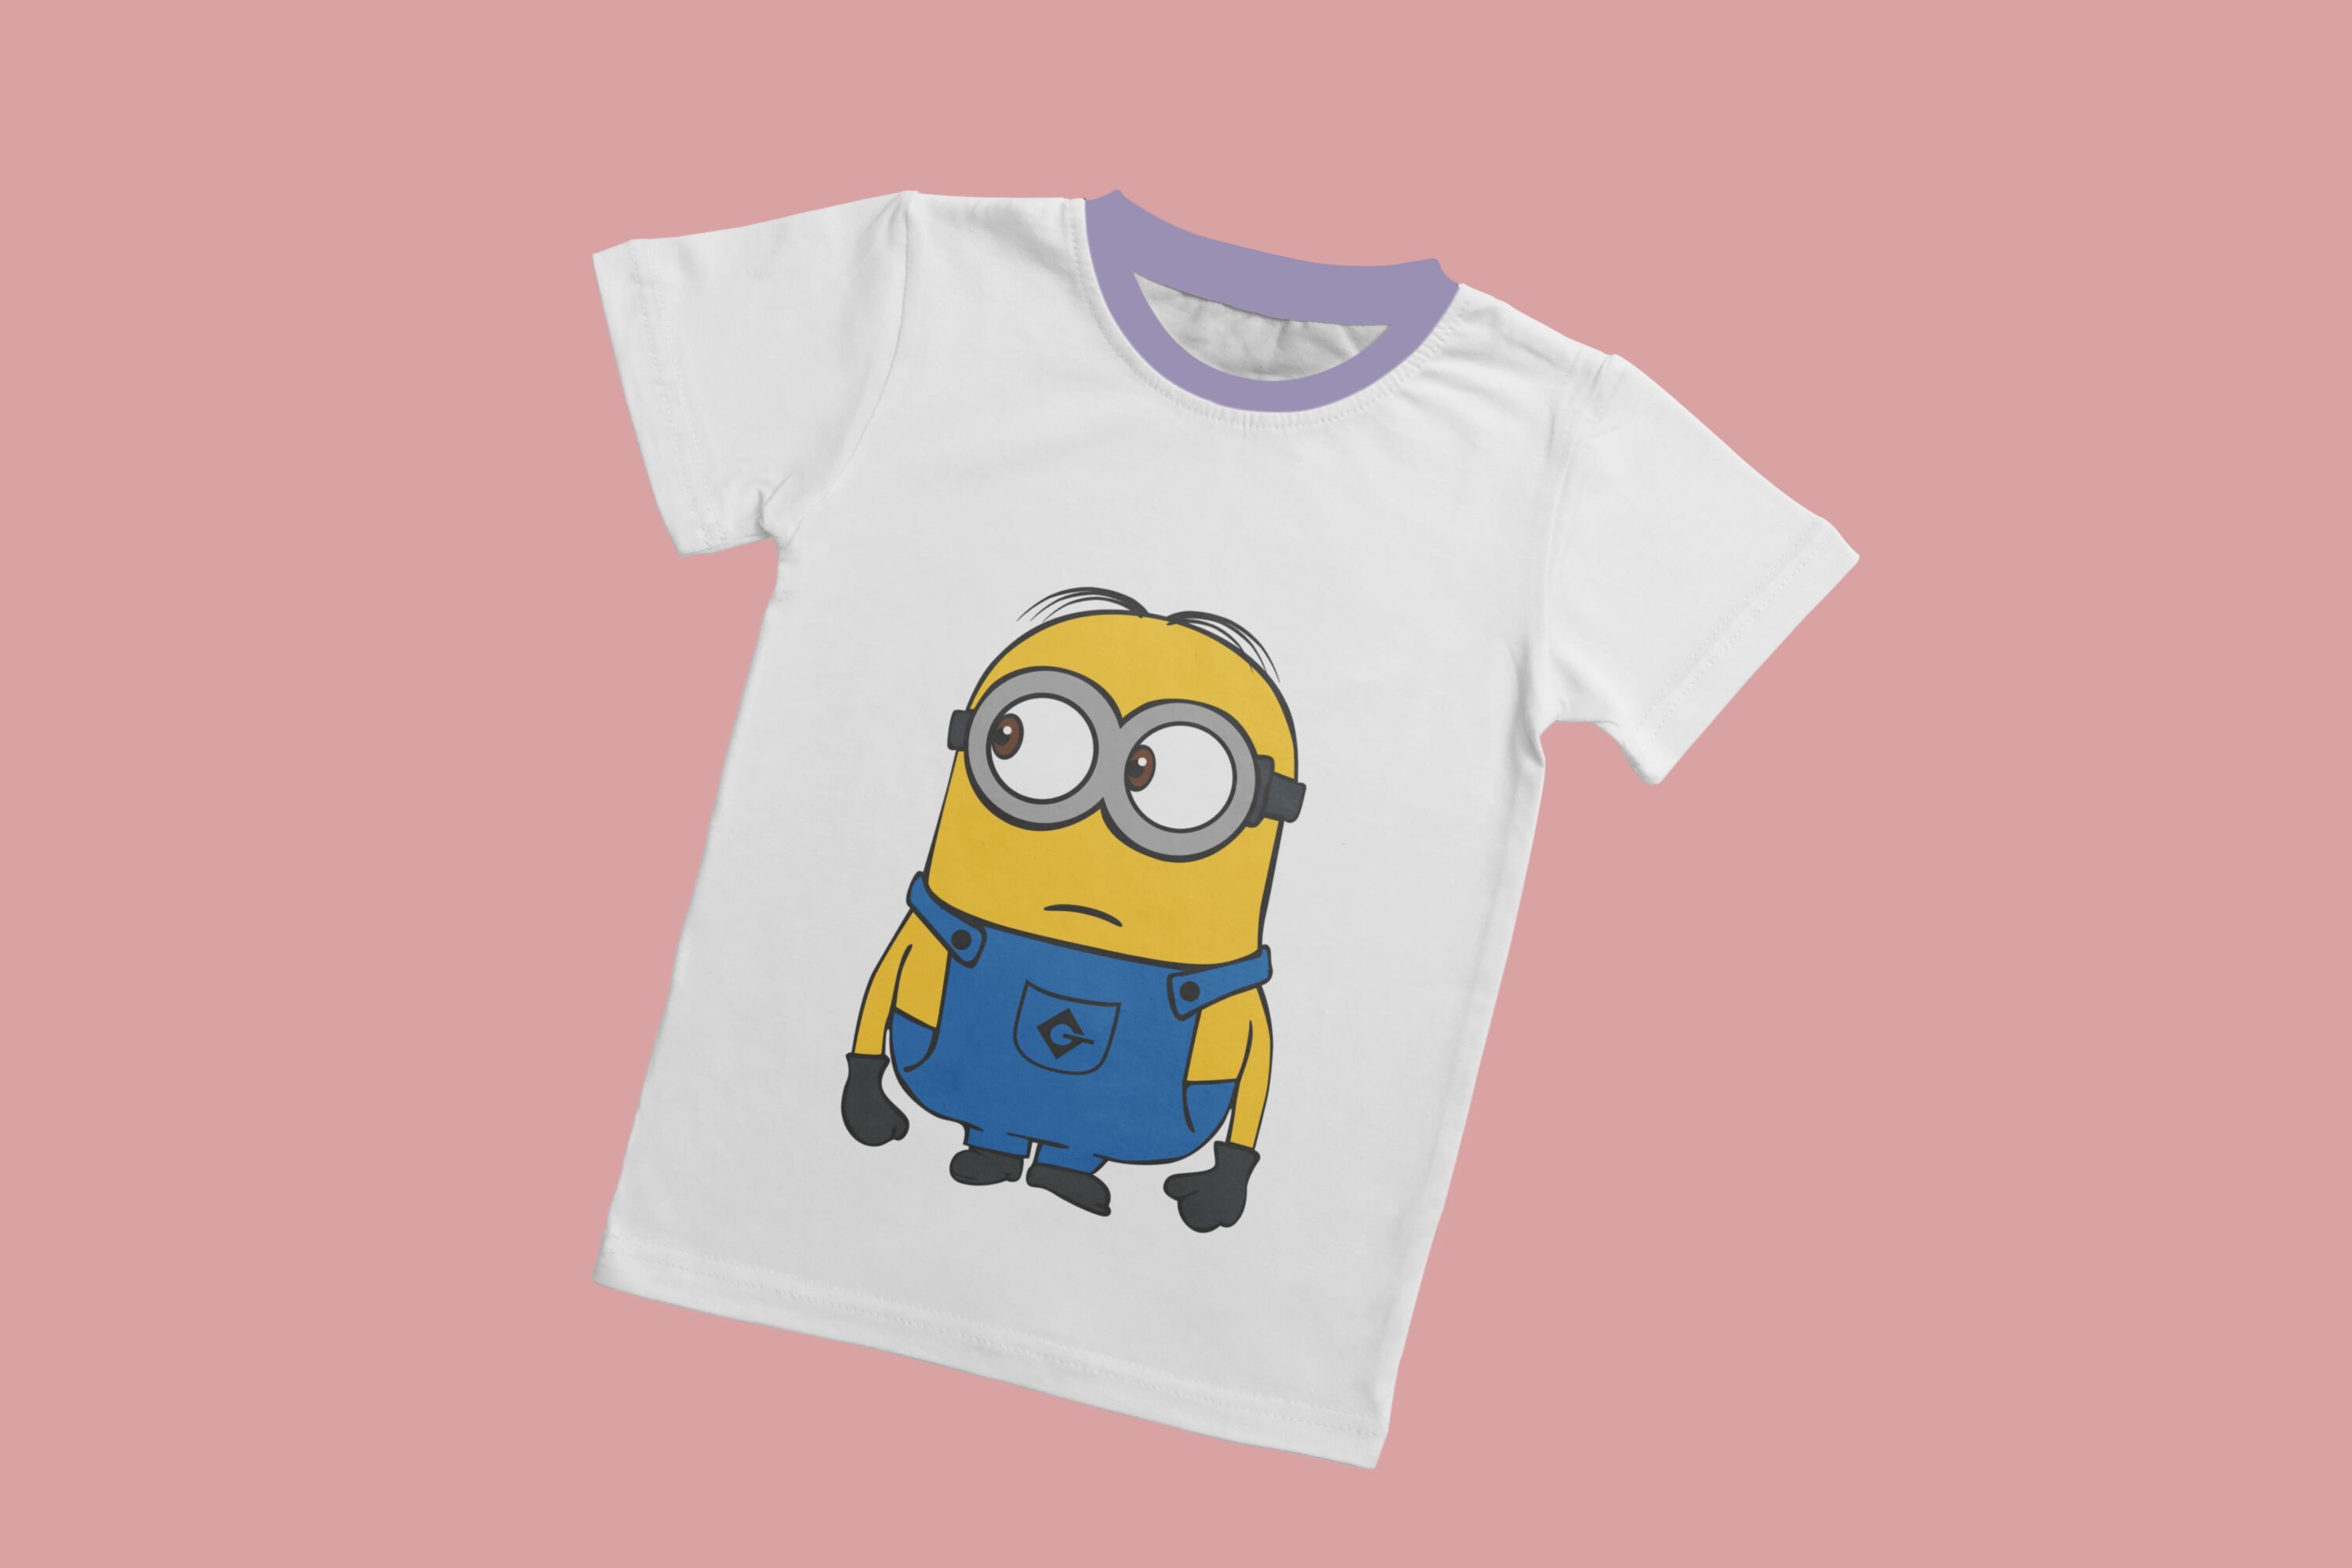 A white T-shirt with a lavender collar and a sad minion.